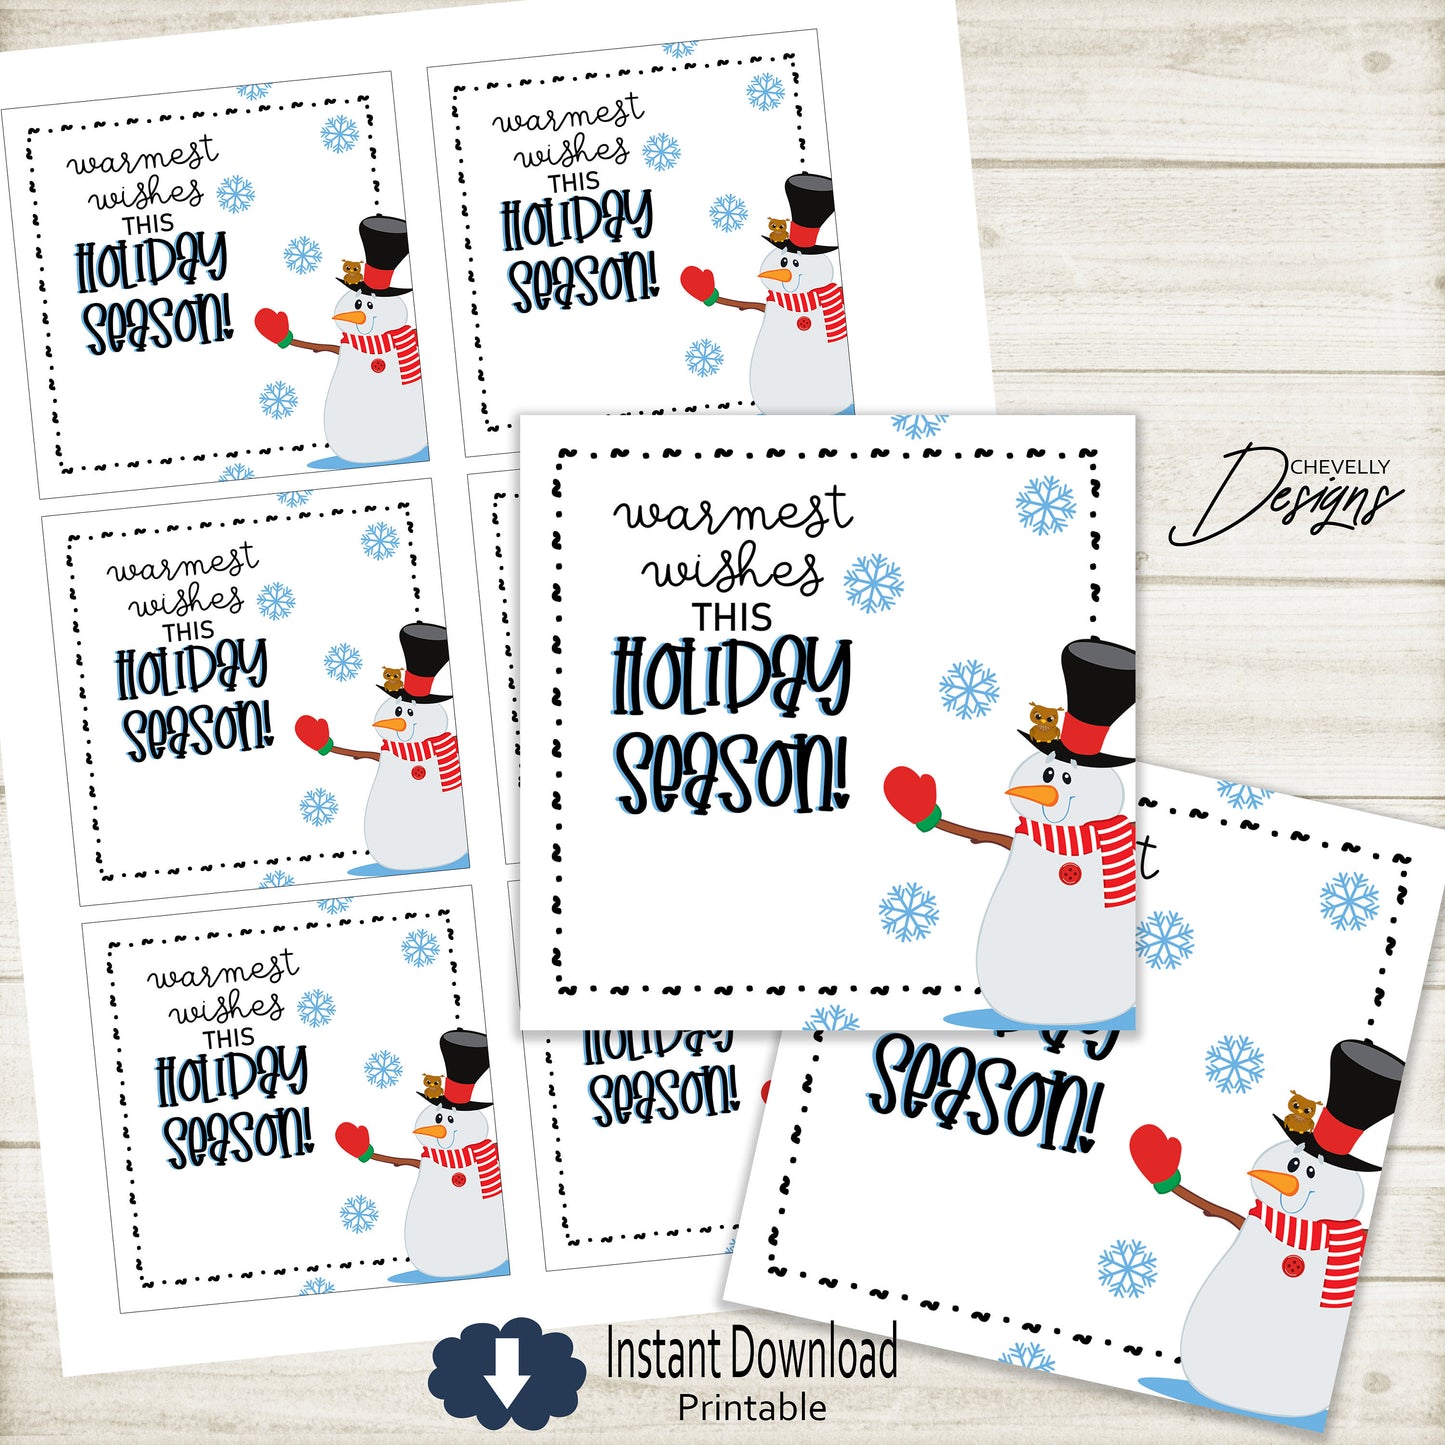 Printable - Warmest wishes this Holiday season - Snowman Gift tags  >>>Instant Digital Download<<<